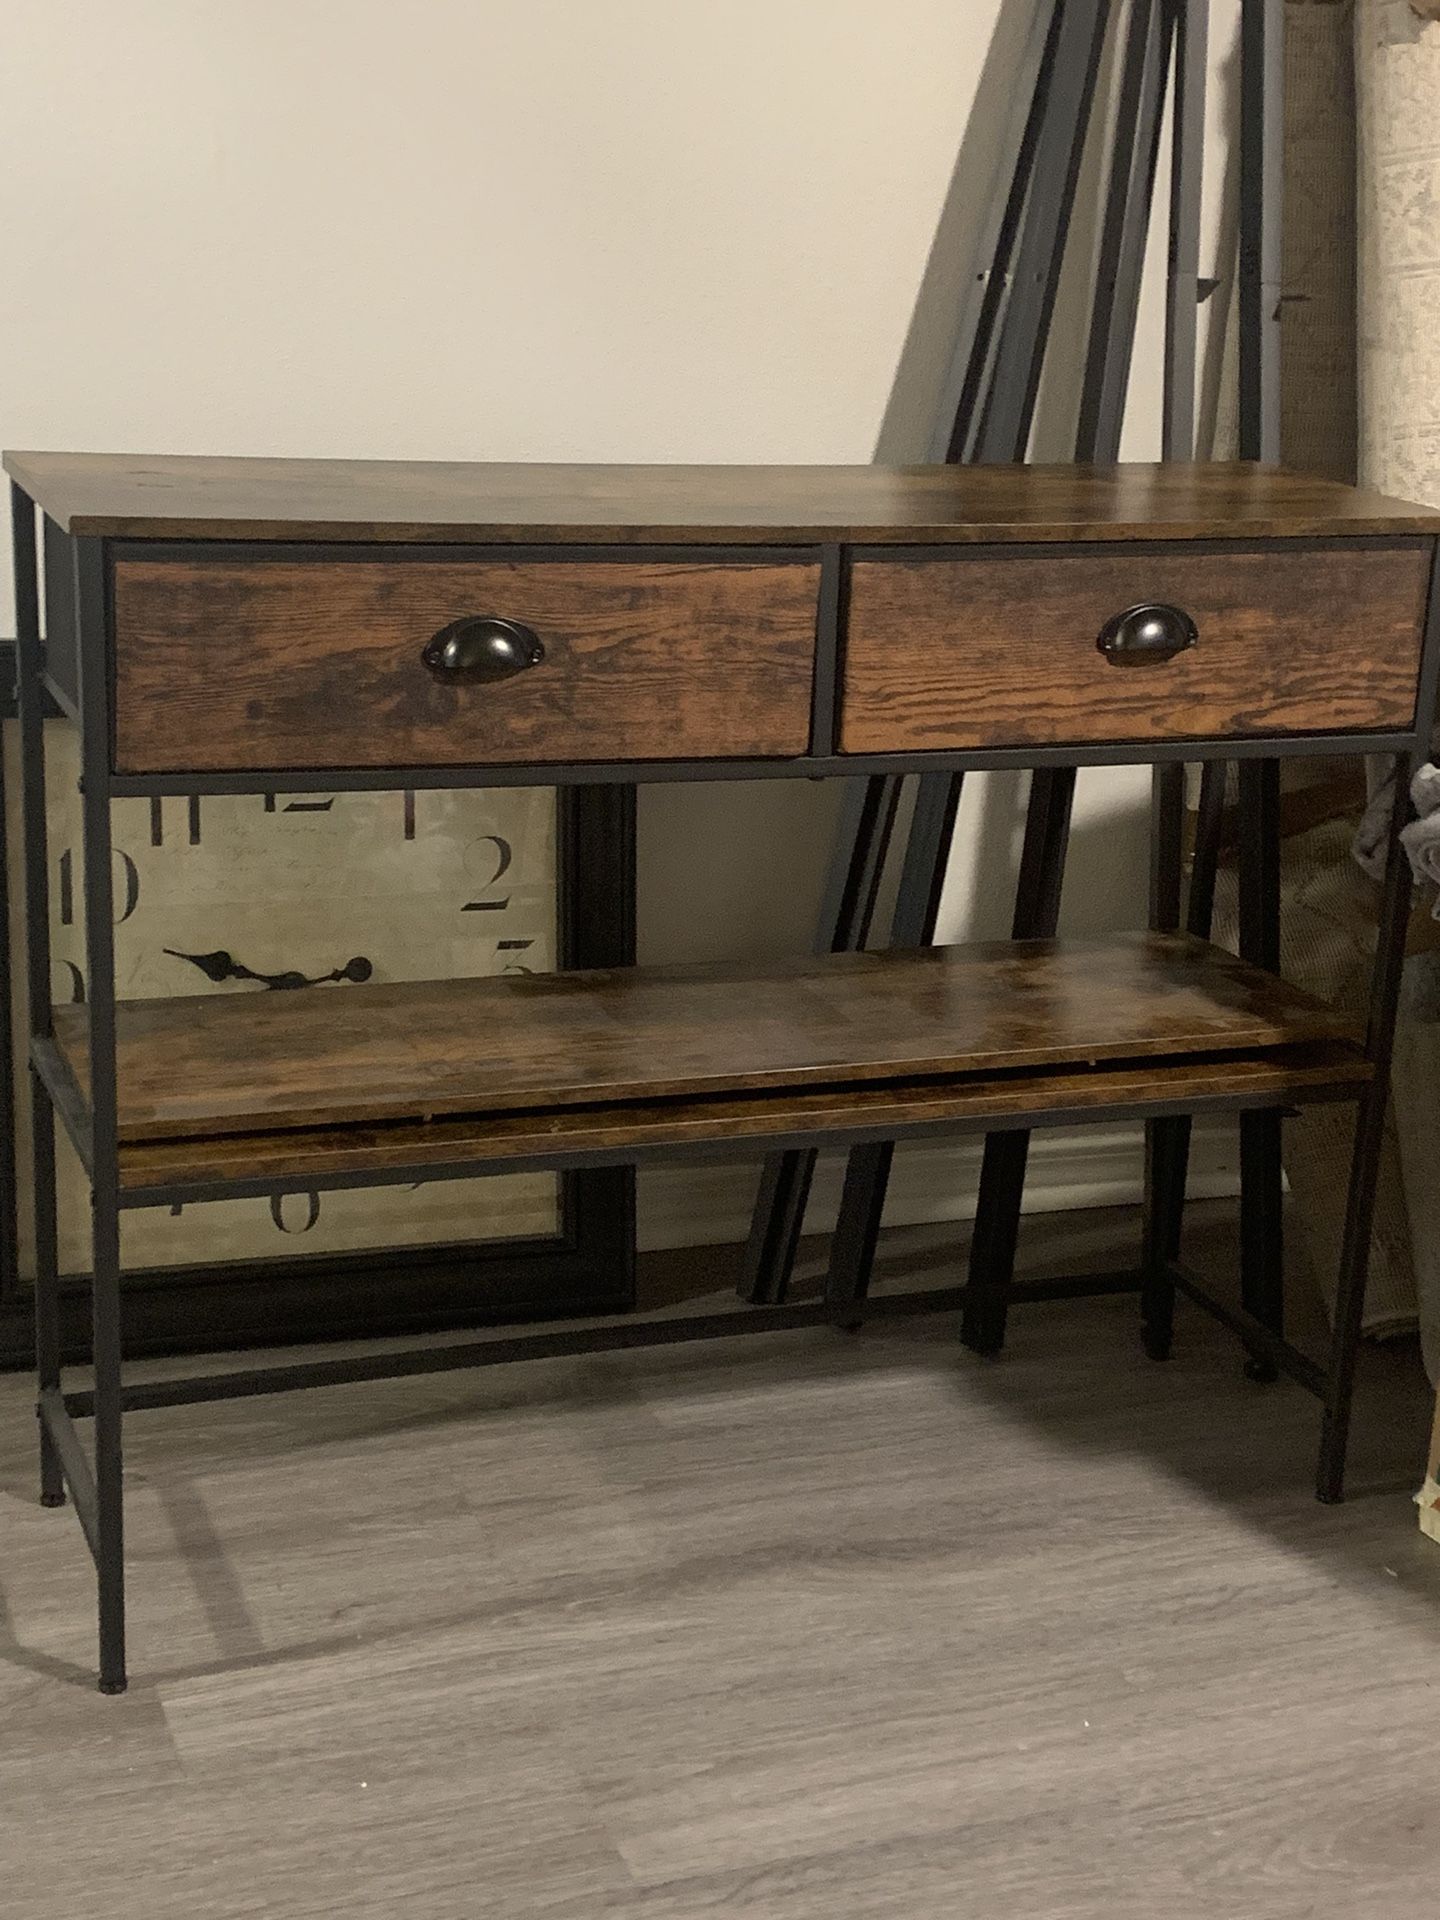 2 drawer Entryway Console $65